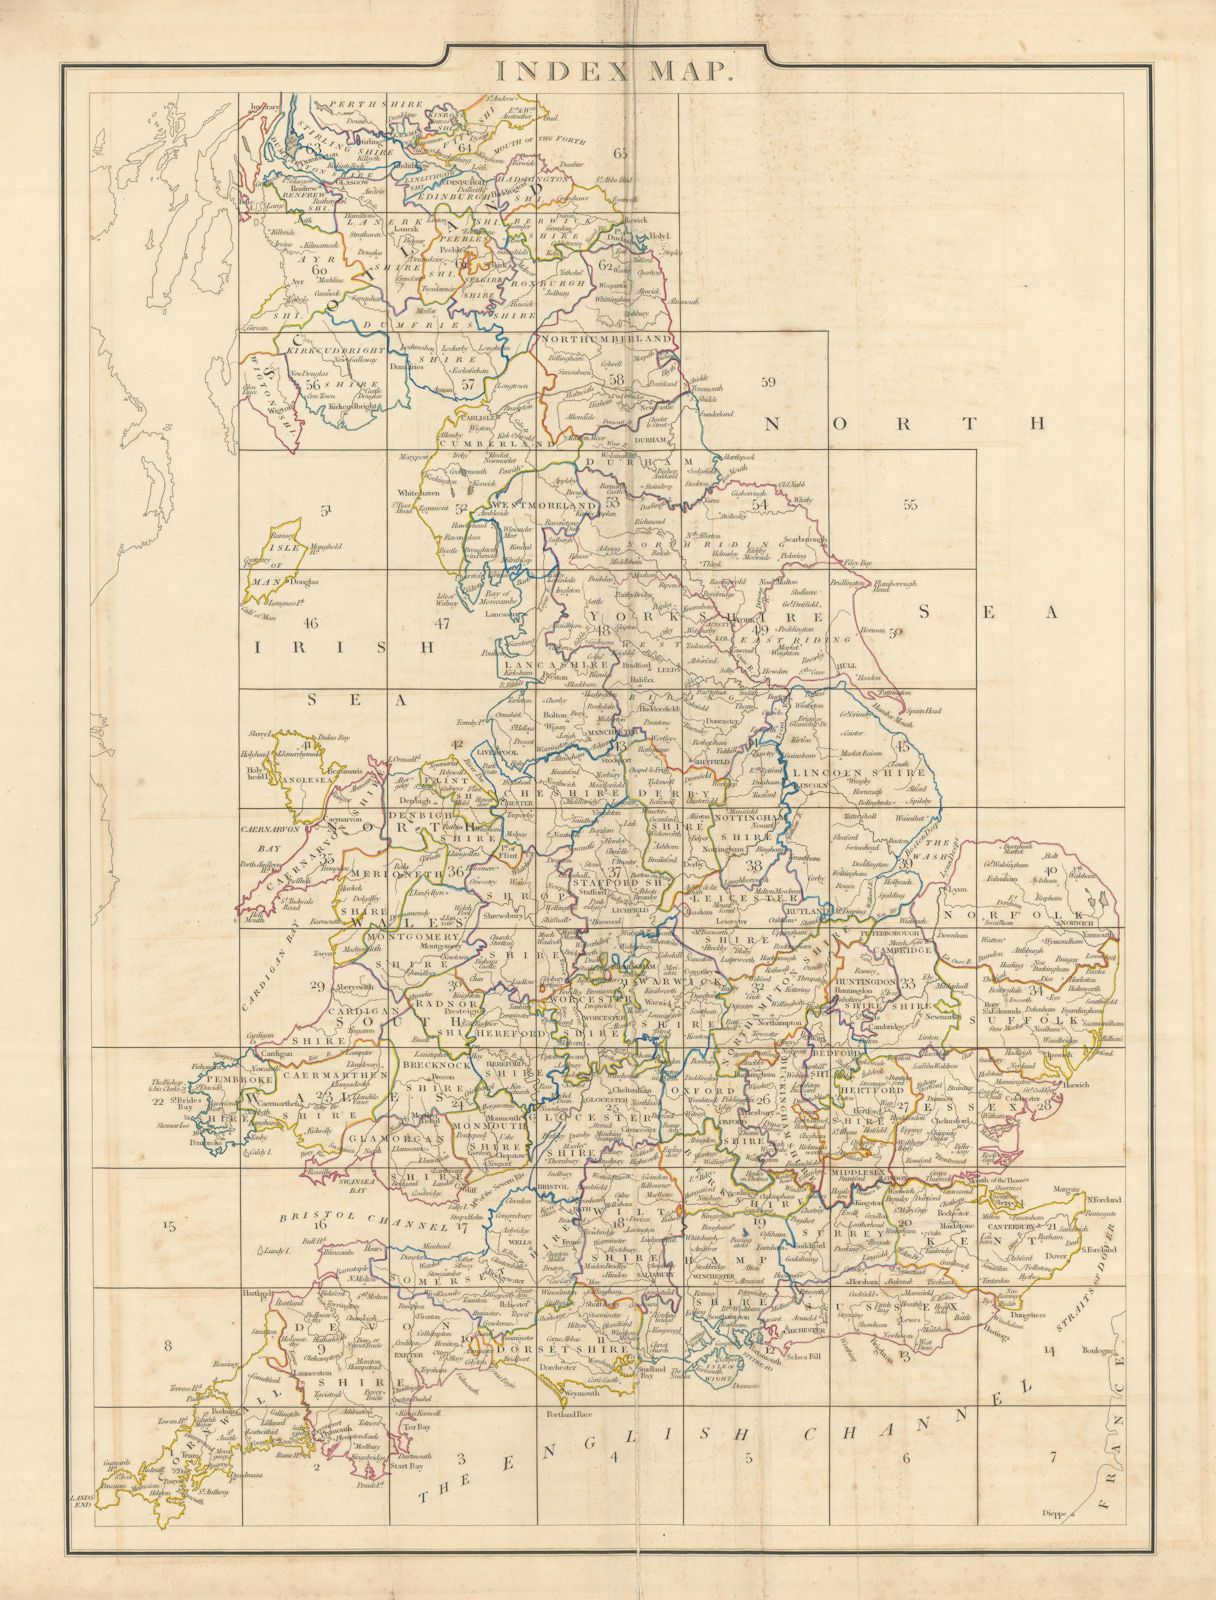 Cary's Improved Map of England and Wales - Index map. G. & J. Cary 1832